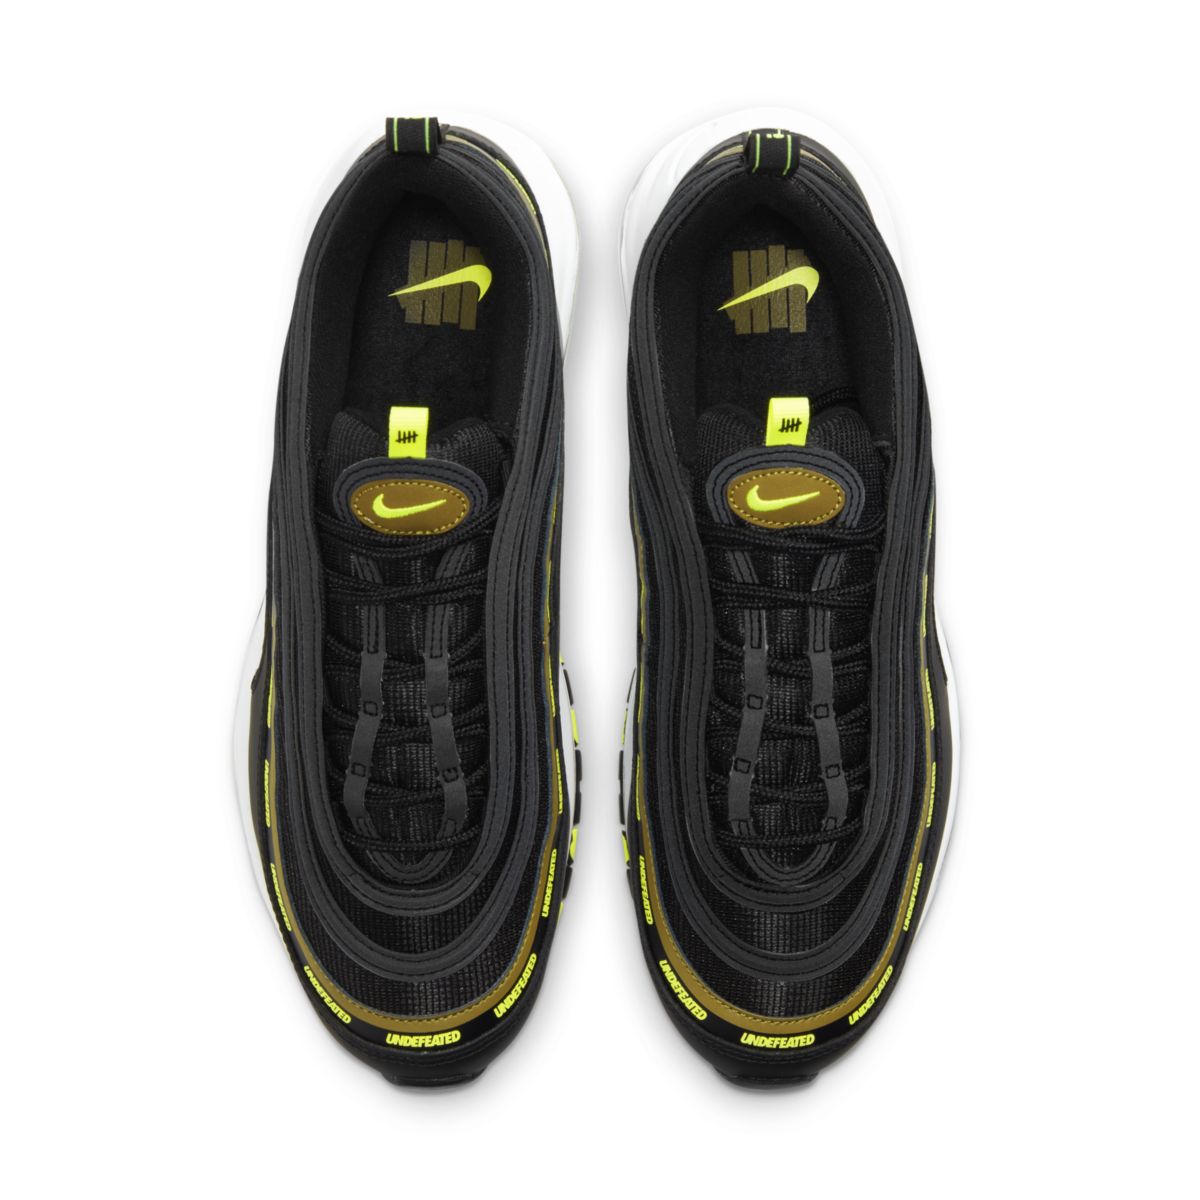 Undefeated x Nike Air Max 97 Black Volt DC4830-001 5